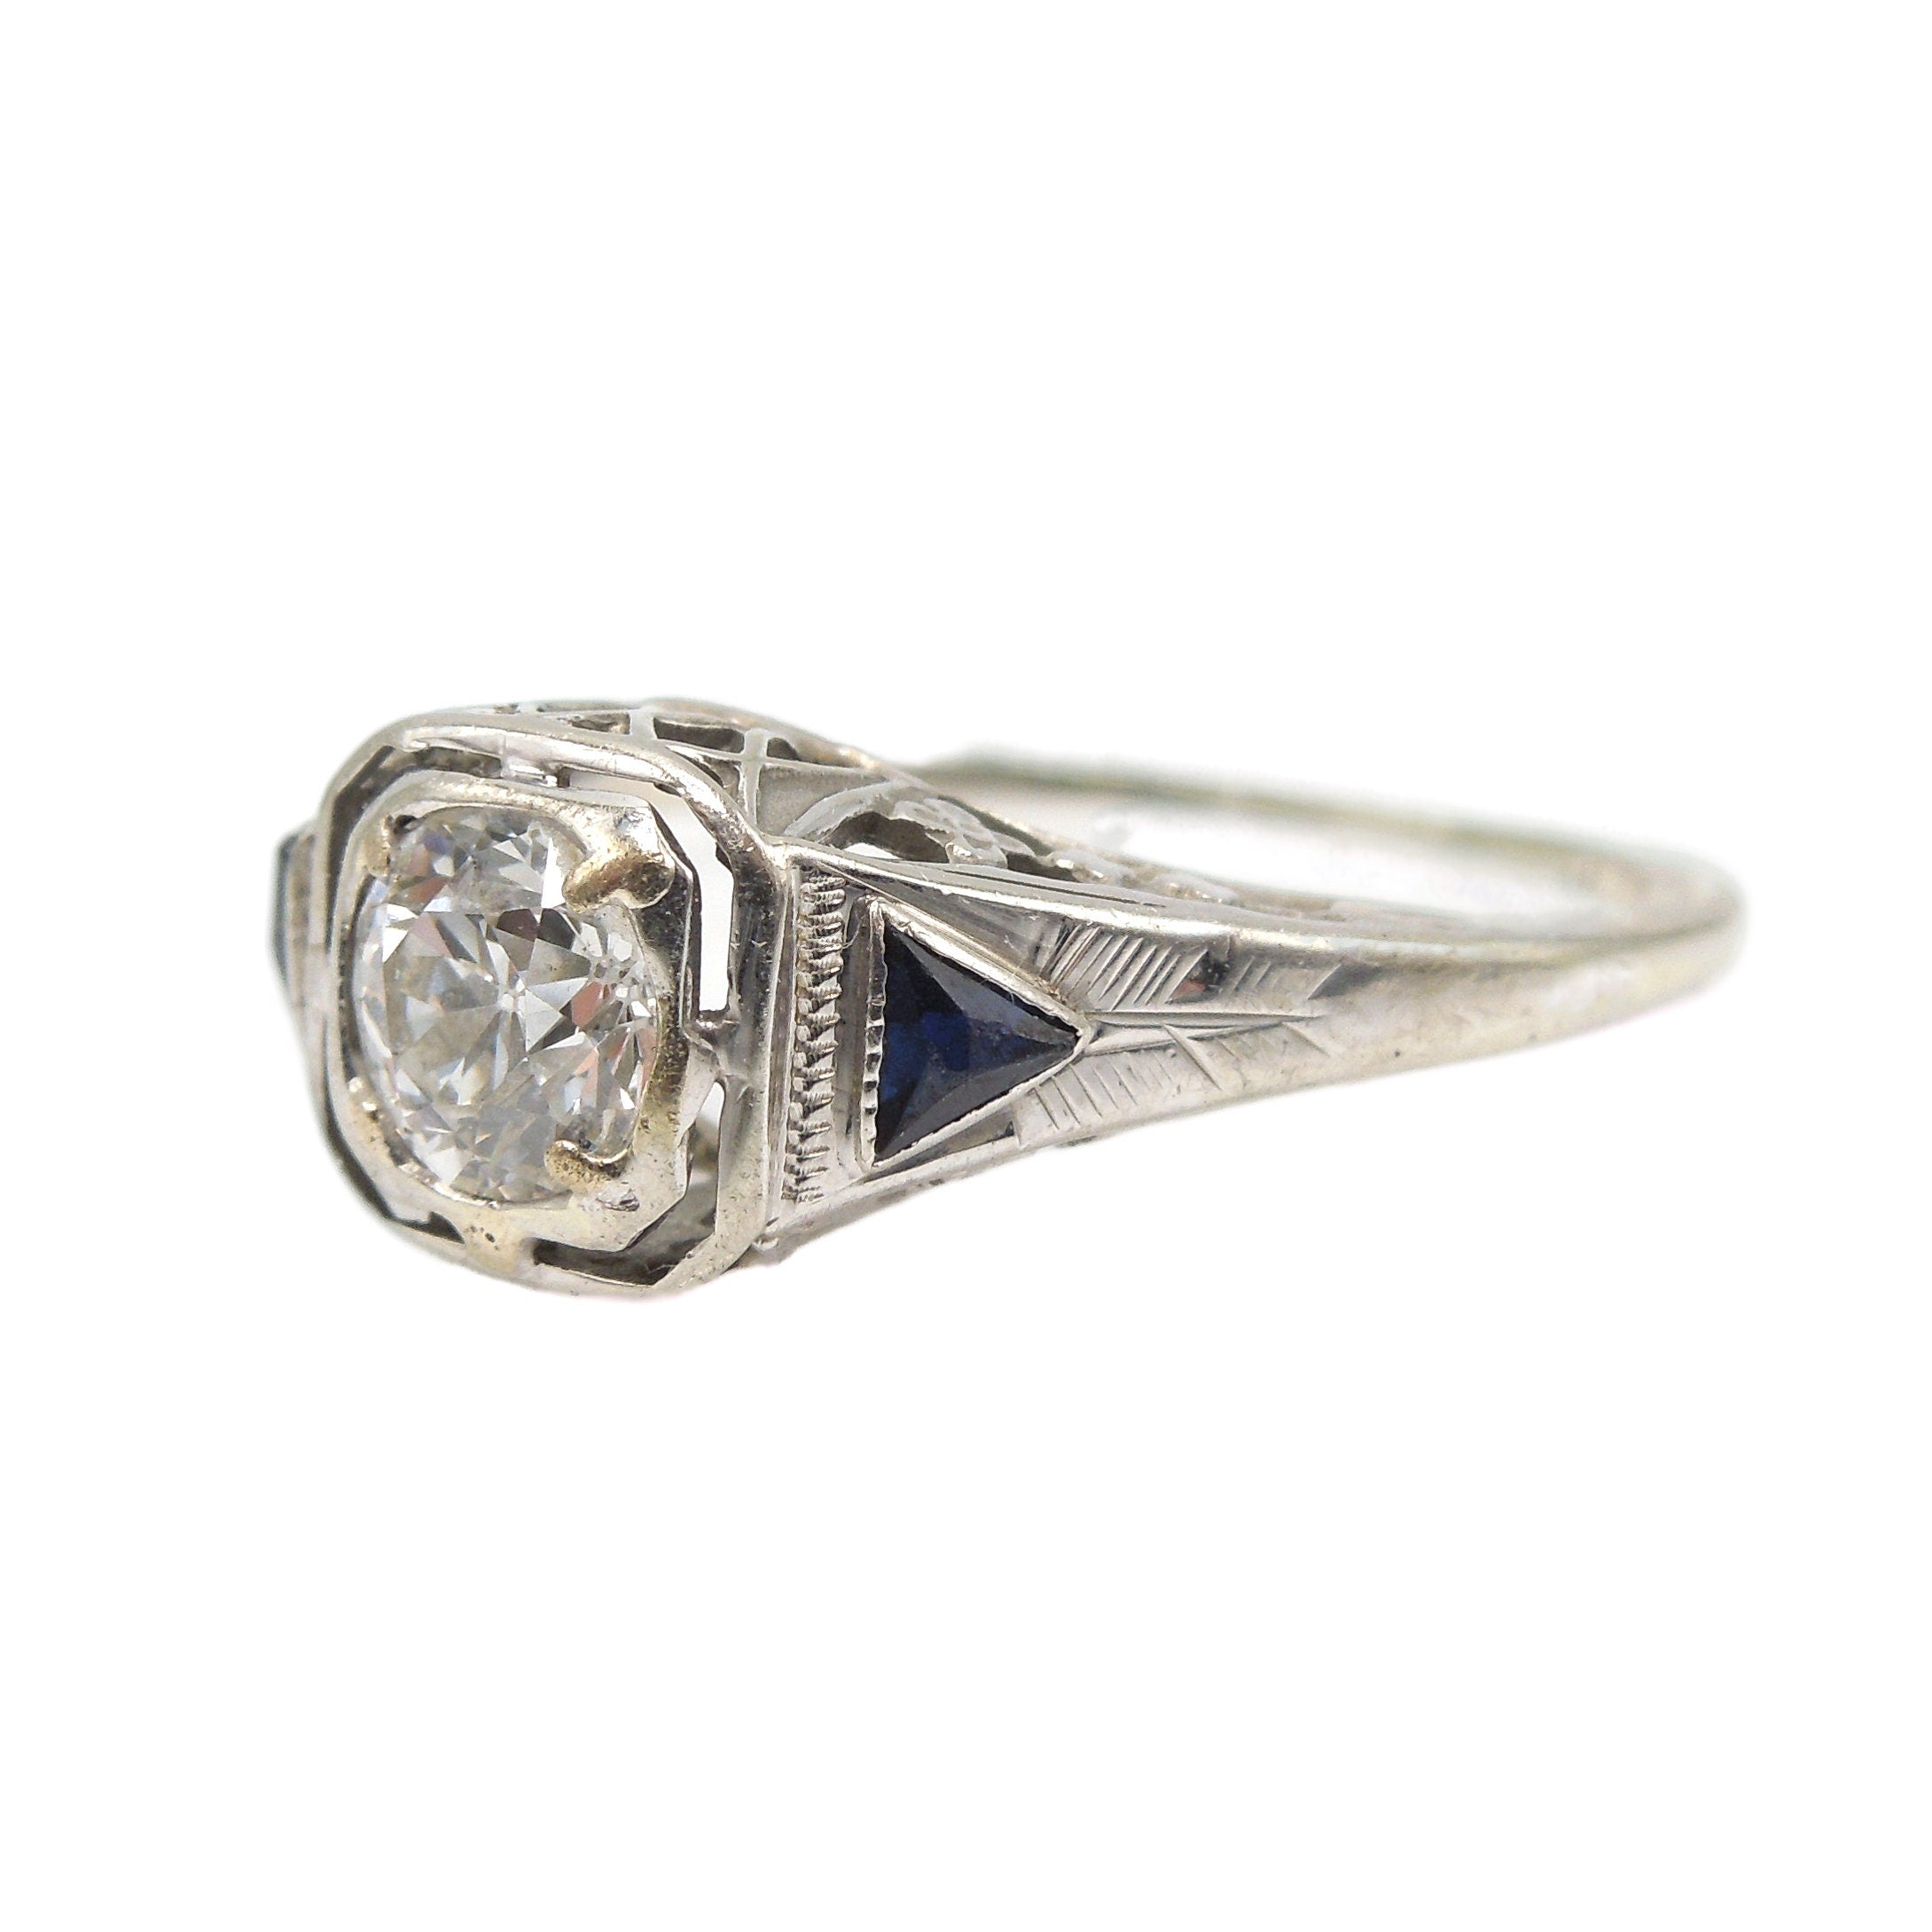 0.50ct European Cut Diamond with Triangle Sapphires in 18K White Gold Filigreed Art Deco Mounting